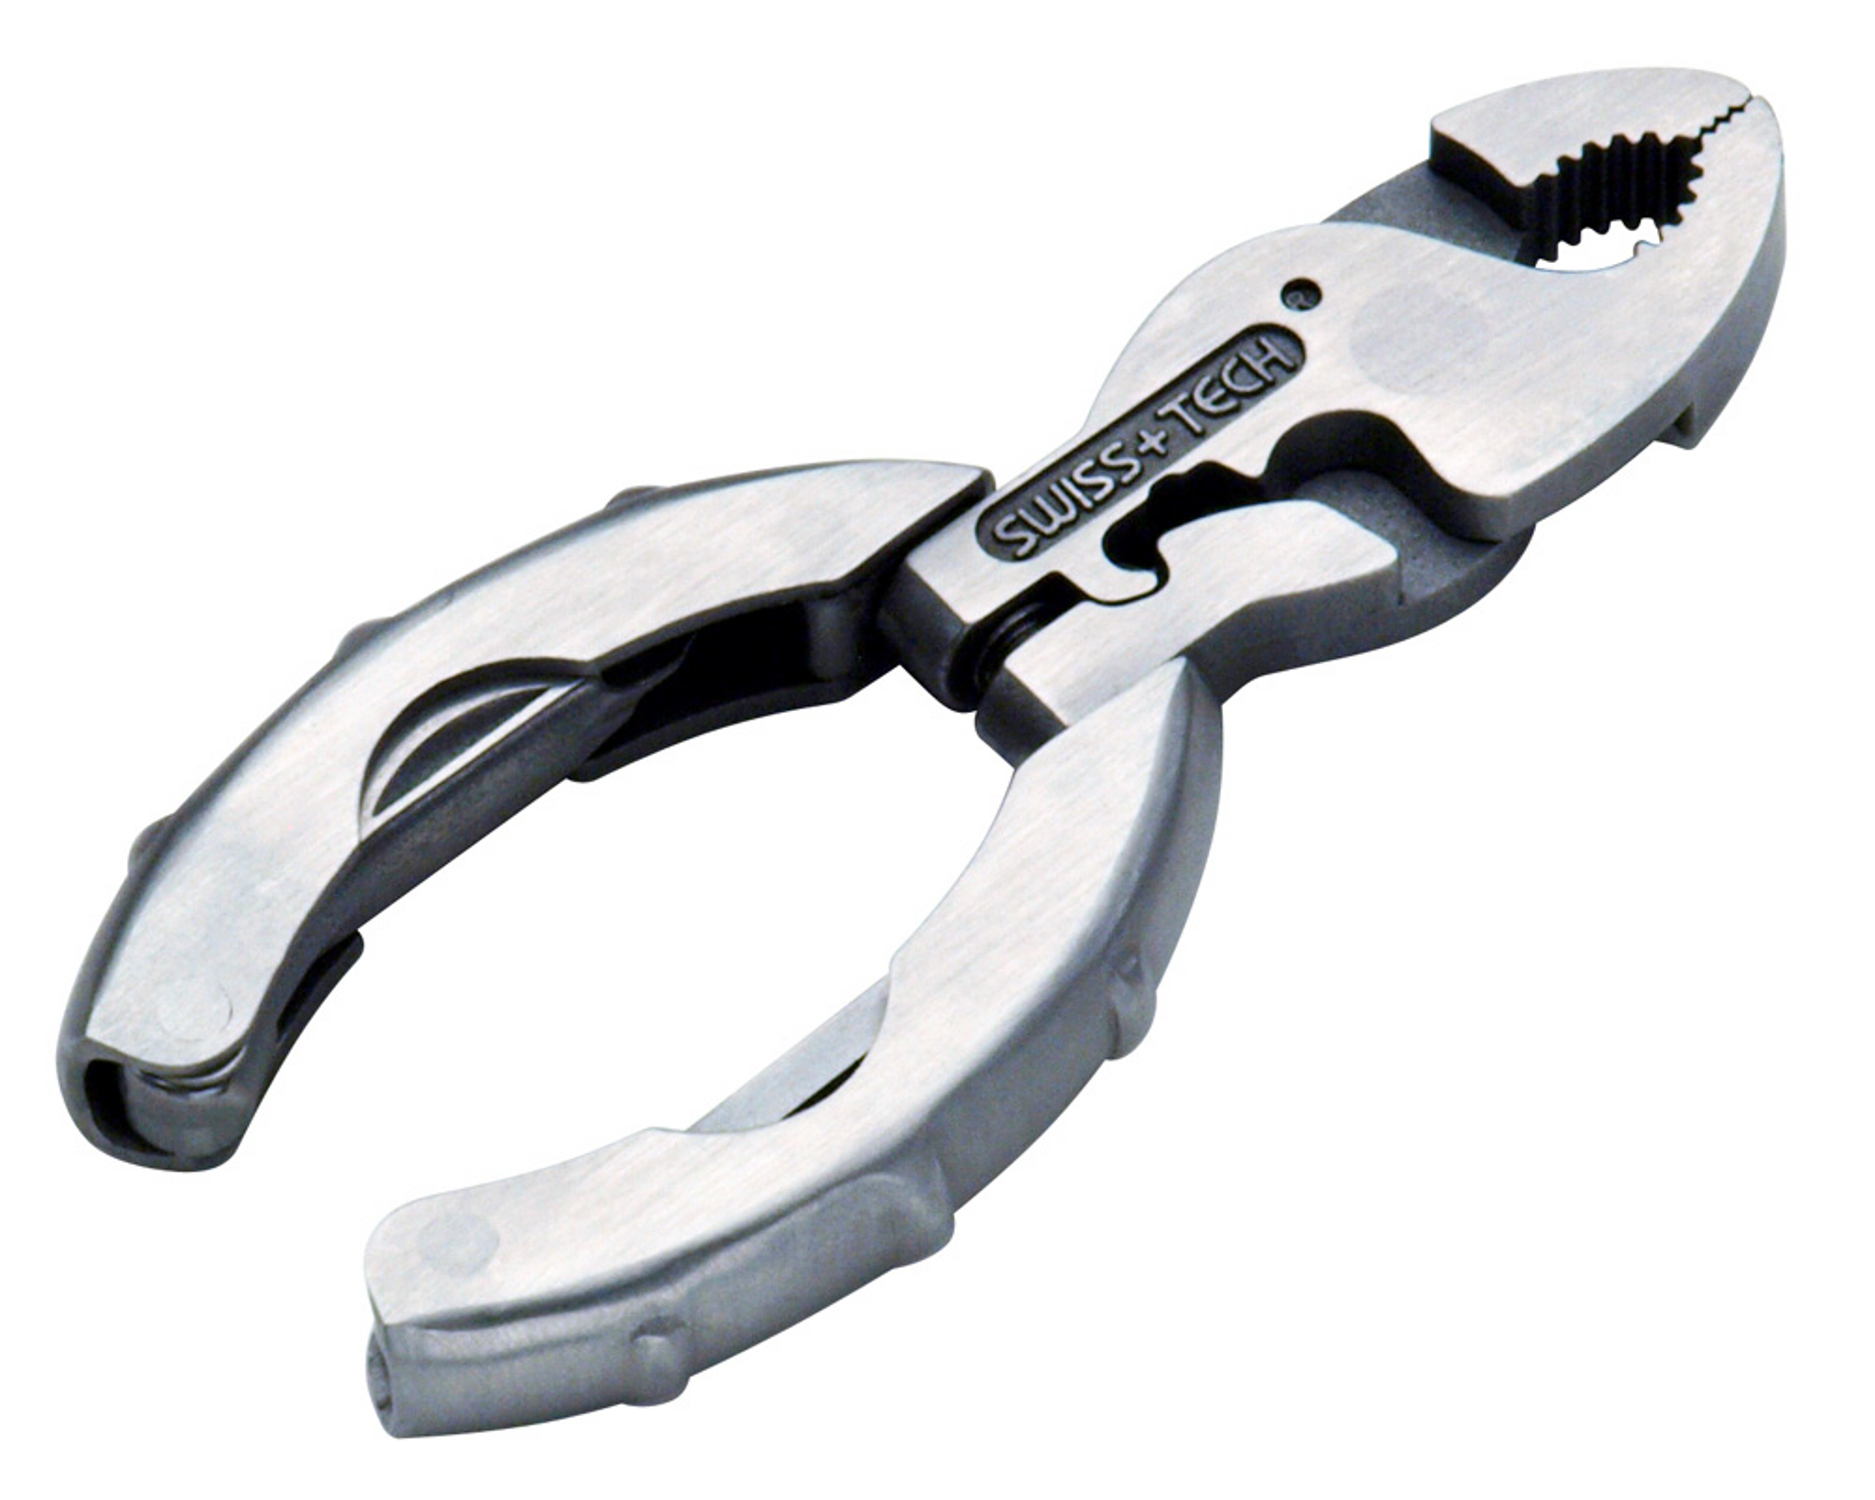 Swiss Tech Micro-Plus EX 9-in-1 Stainless Steel Keychain Multi-Tool - Blade  HQ